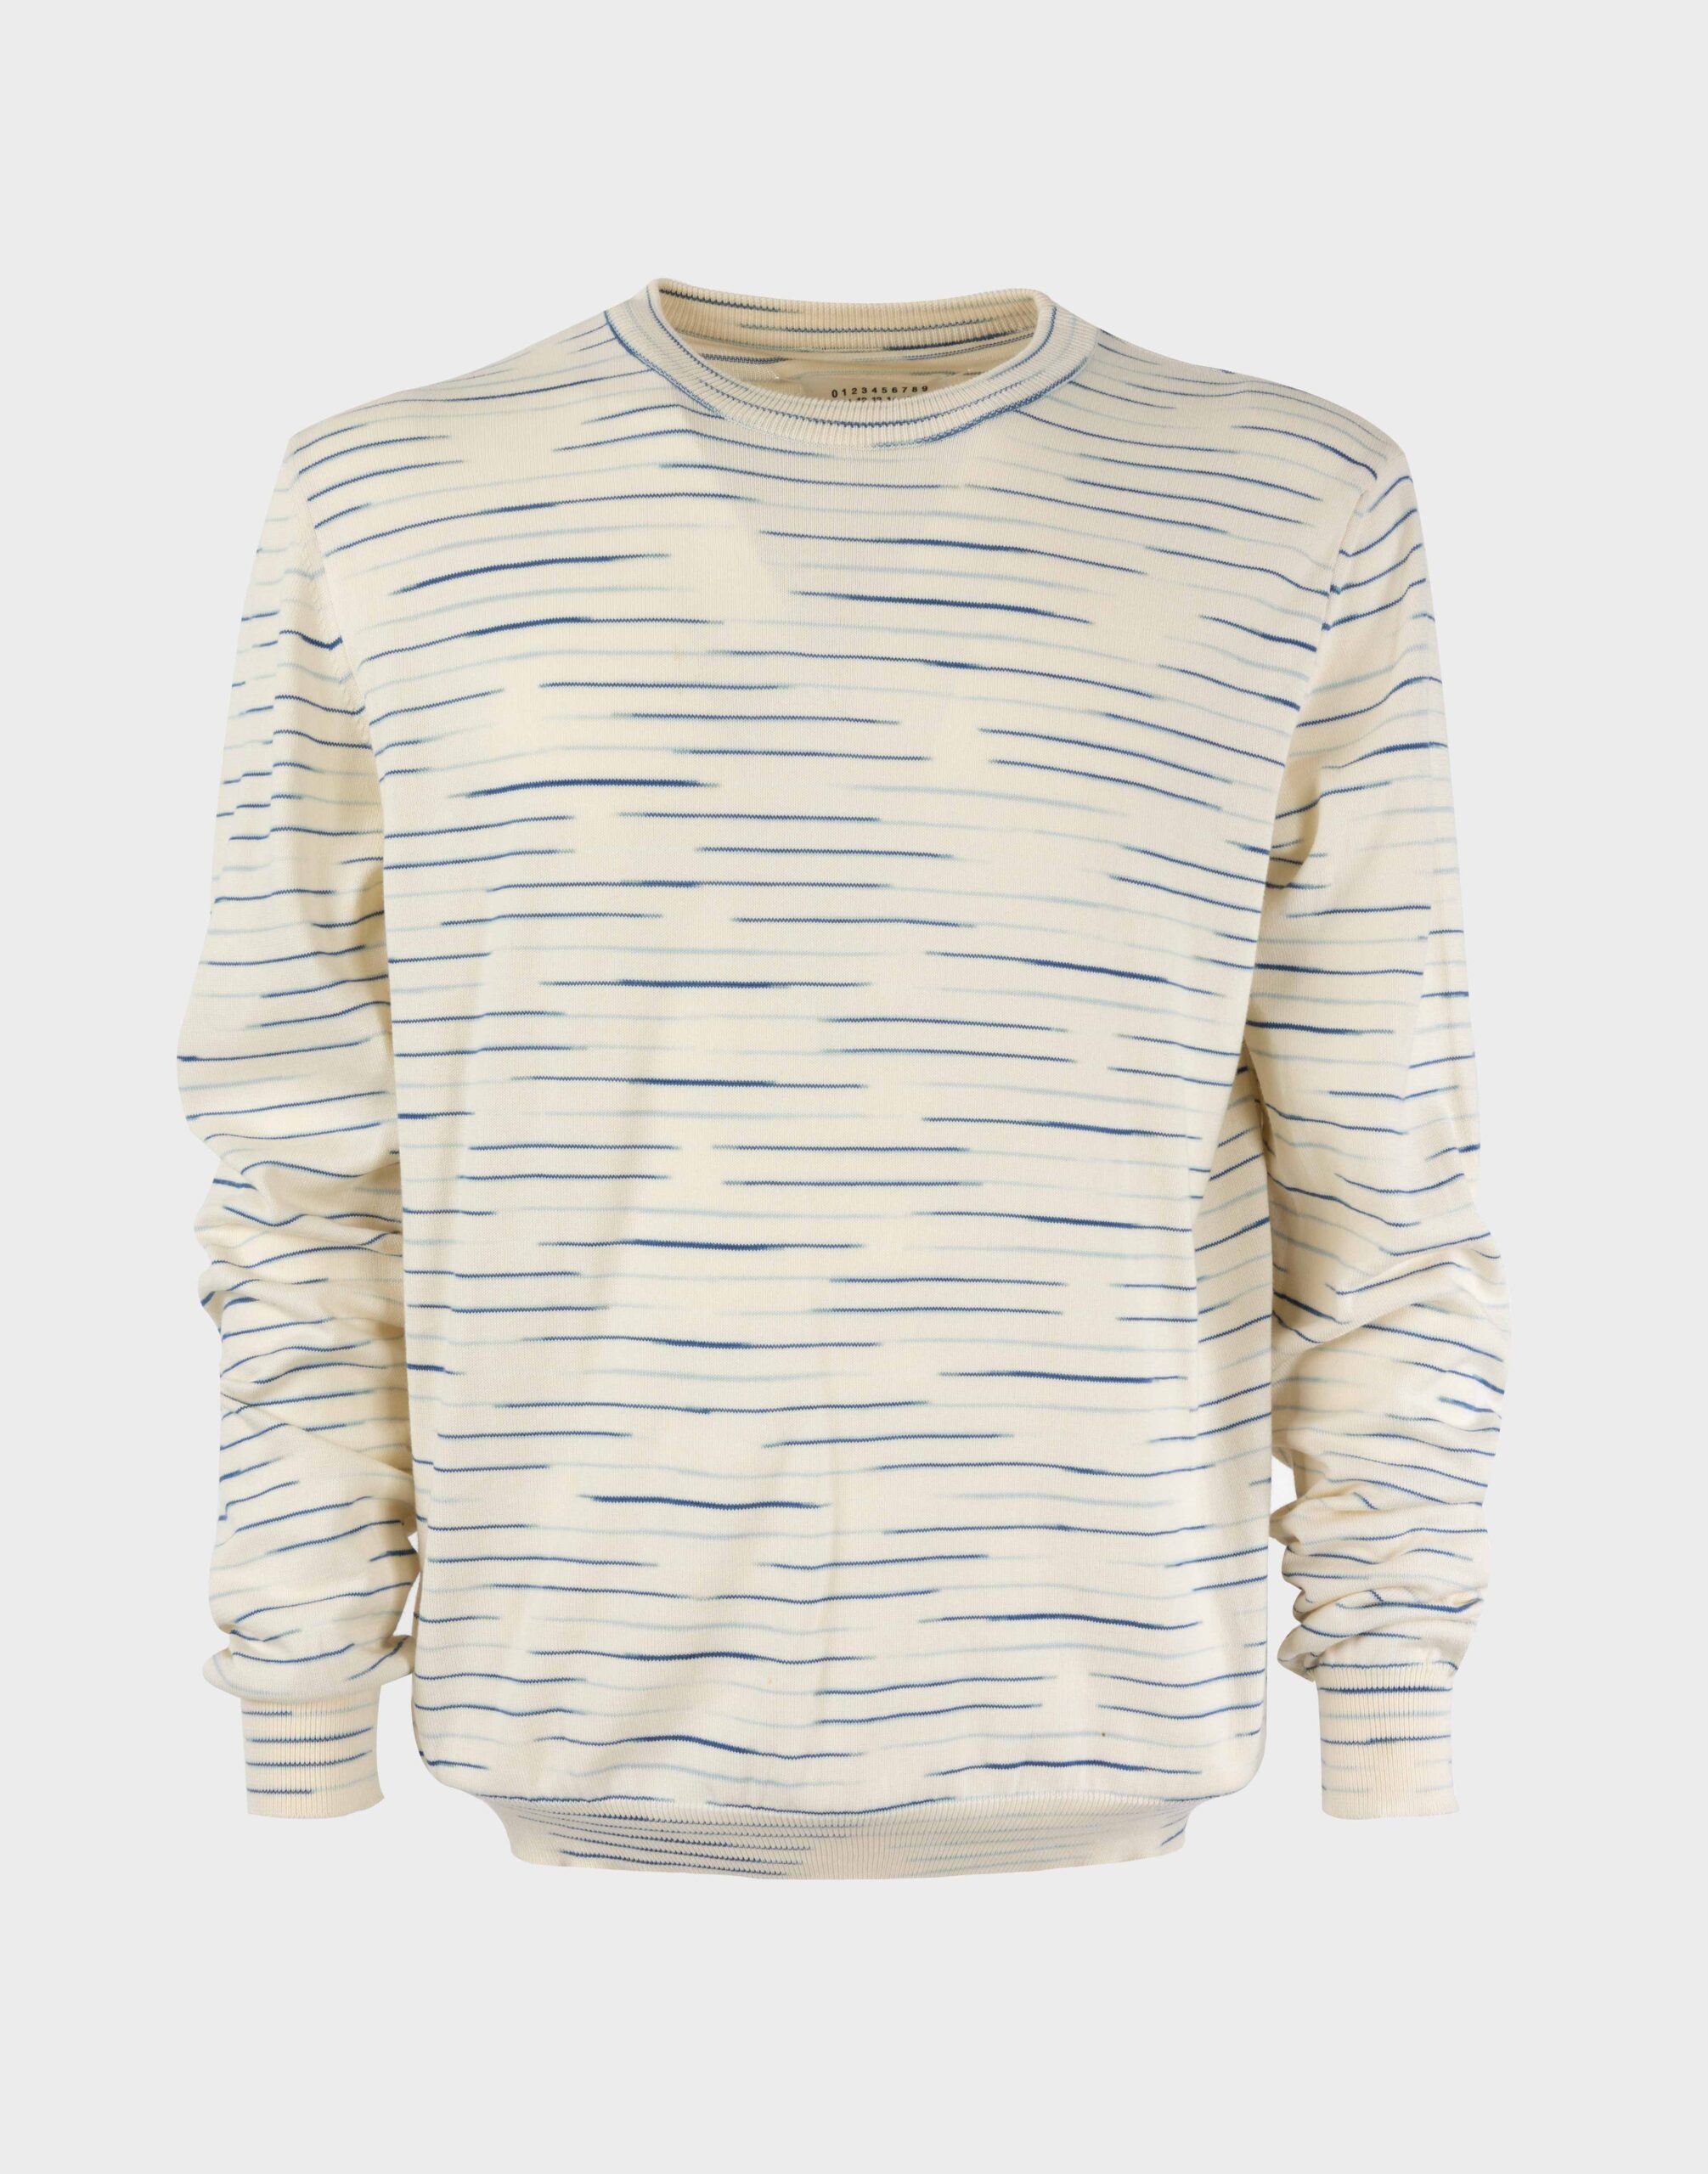 light beige men's jumper with blue and light blue filaments, photographed on ghost dummy with grey background